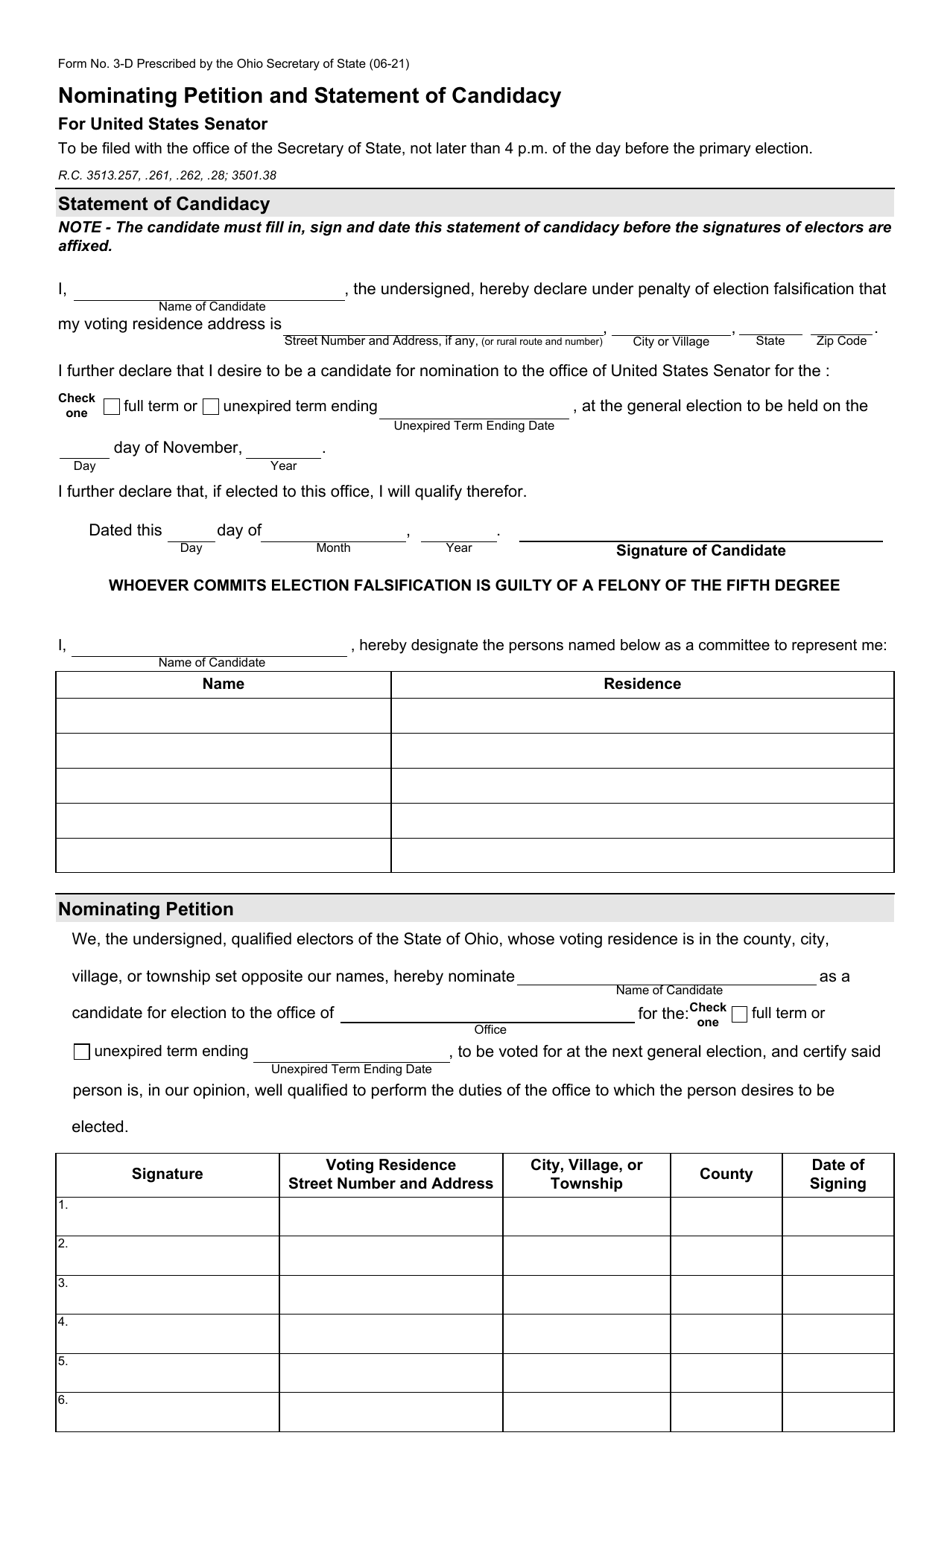 Form 3-D Nominating Petition and Statement of Candidacy for United States Senator - Ohio, Page 1